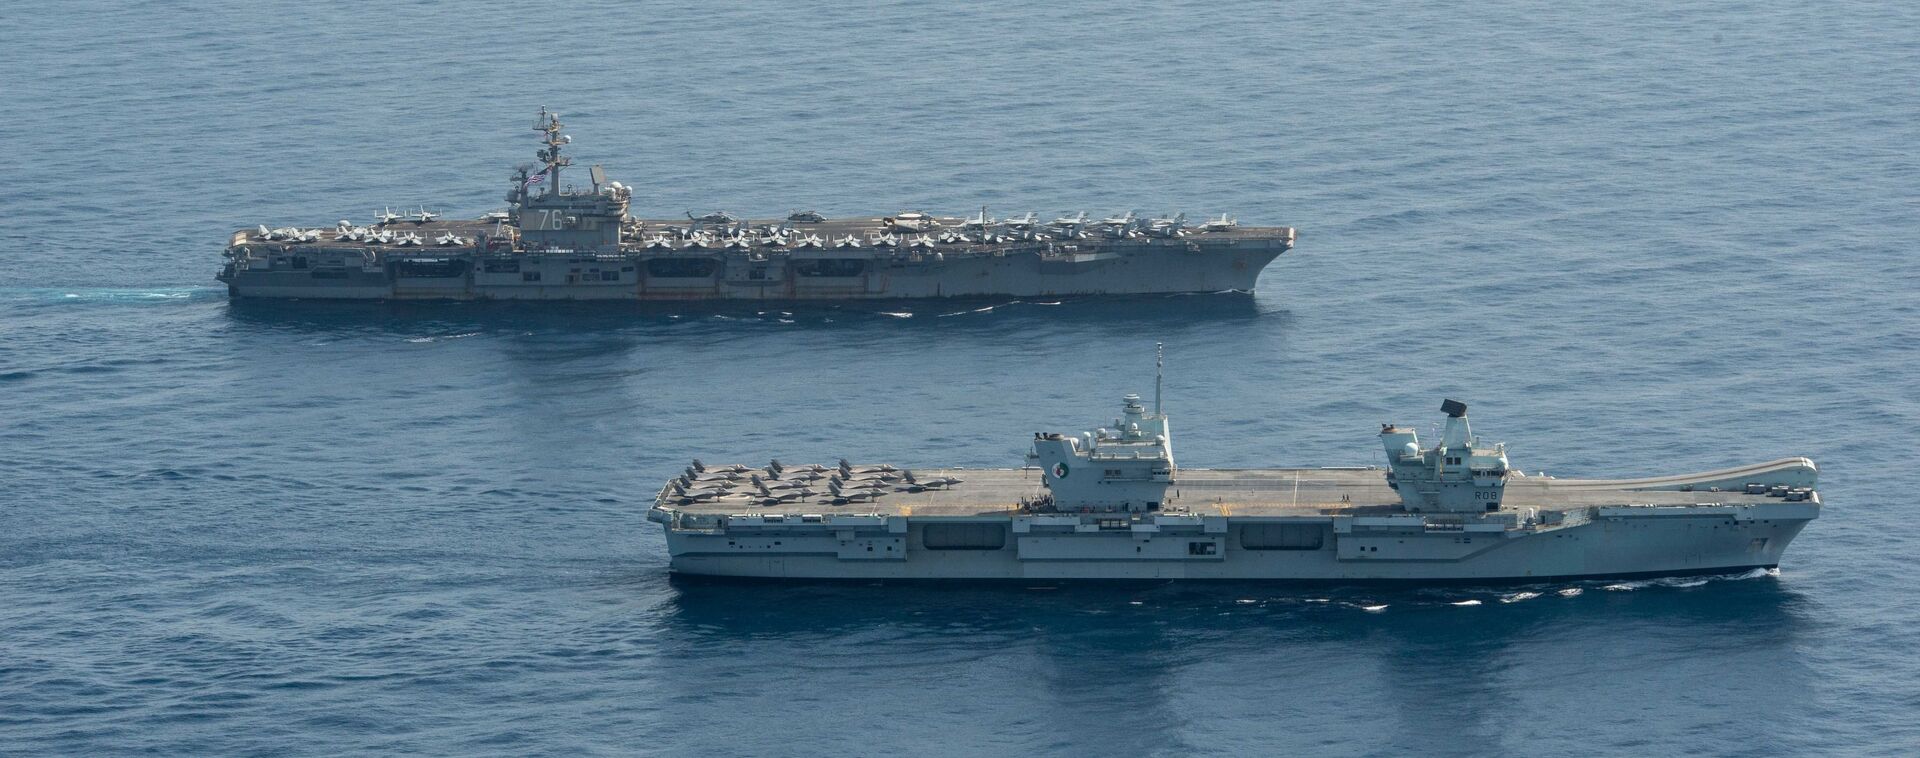 Royal Navy aircraft carrier HMS Queen Elizabeth ( R 08), front, and aircraft carrier USS Ronald Reagan (CVN 76) operate in formation in the Gulf of Aden, July 12. - Sputnik International, 1920, 07.09.2021